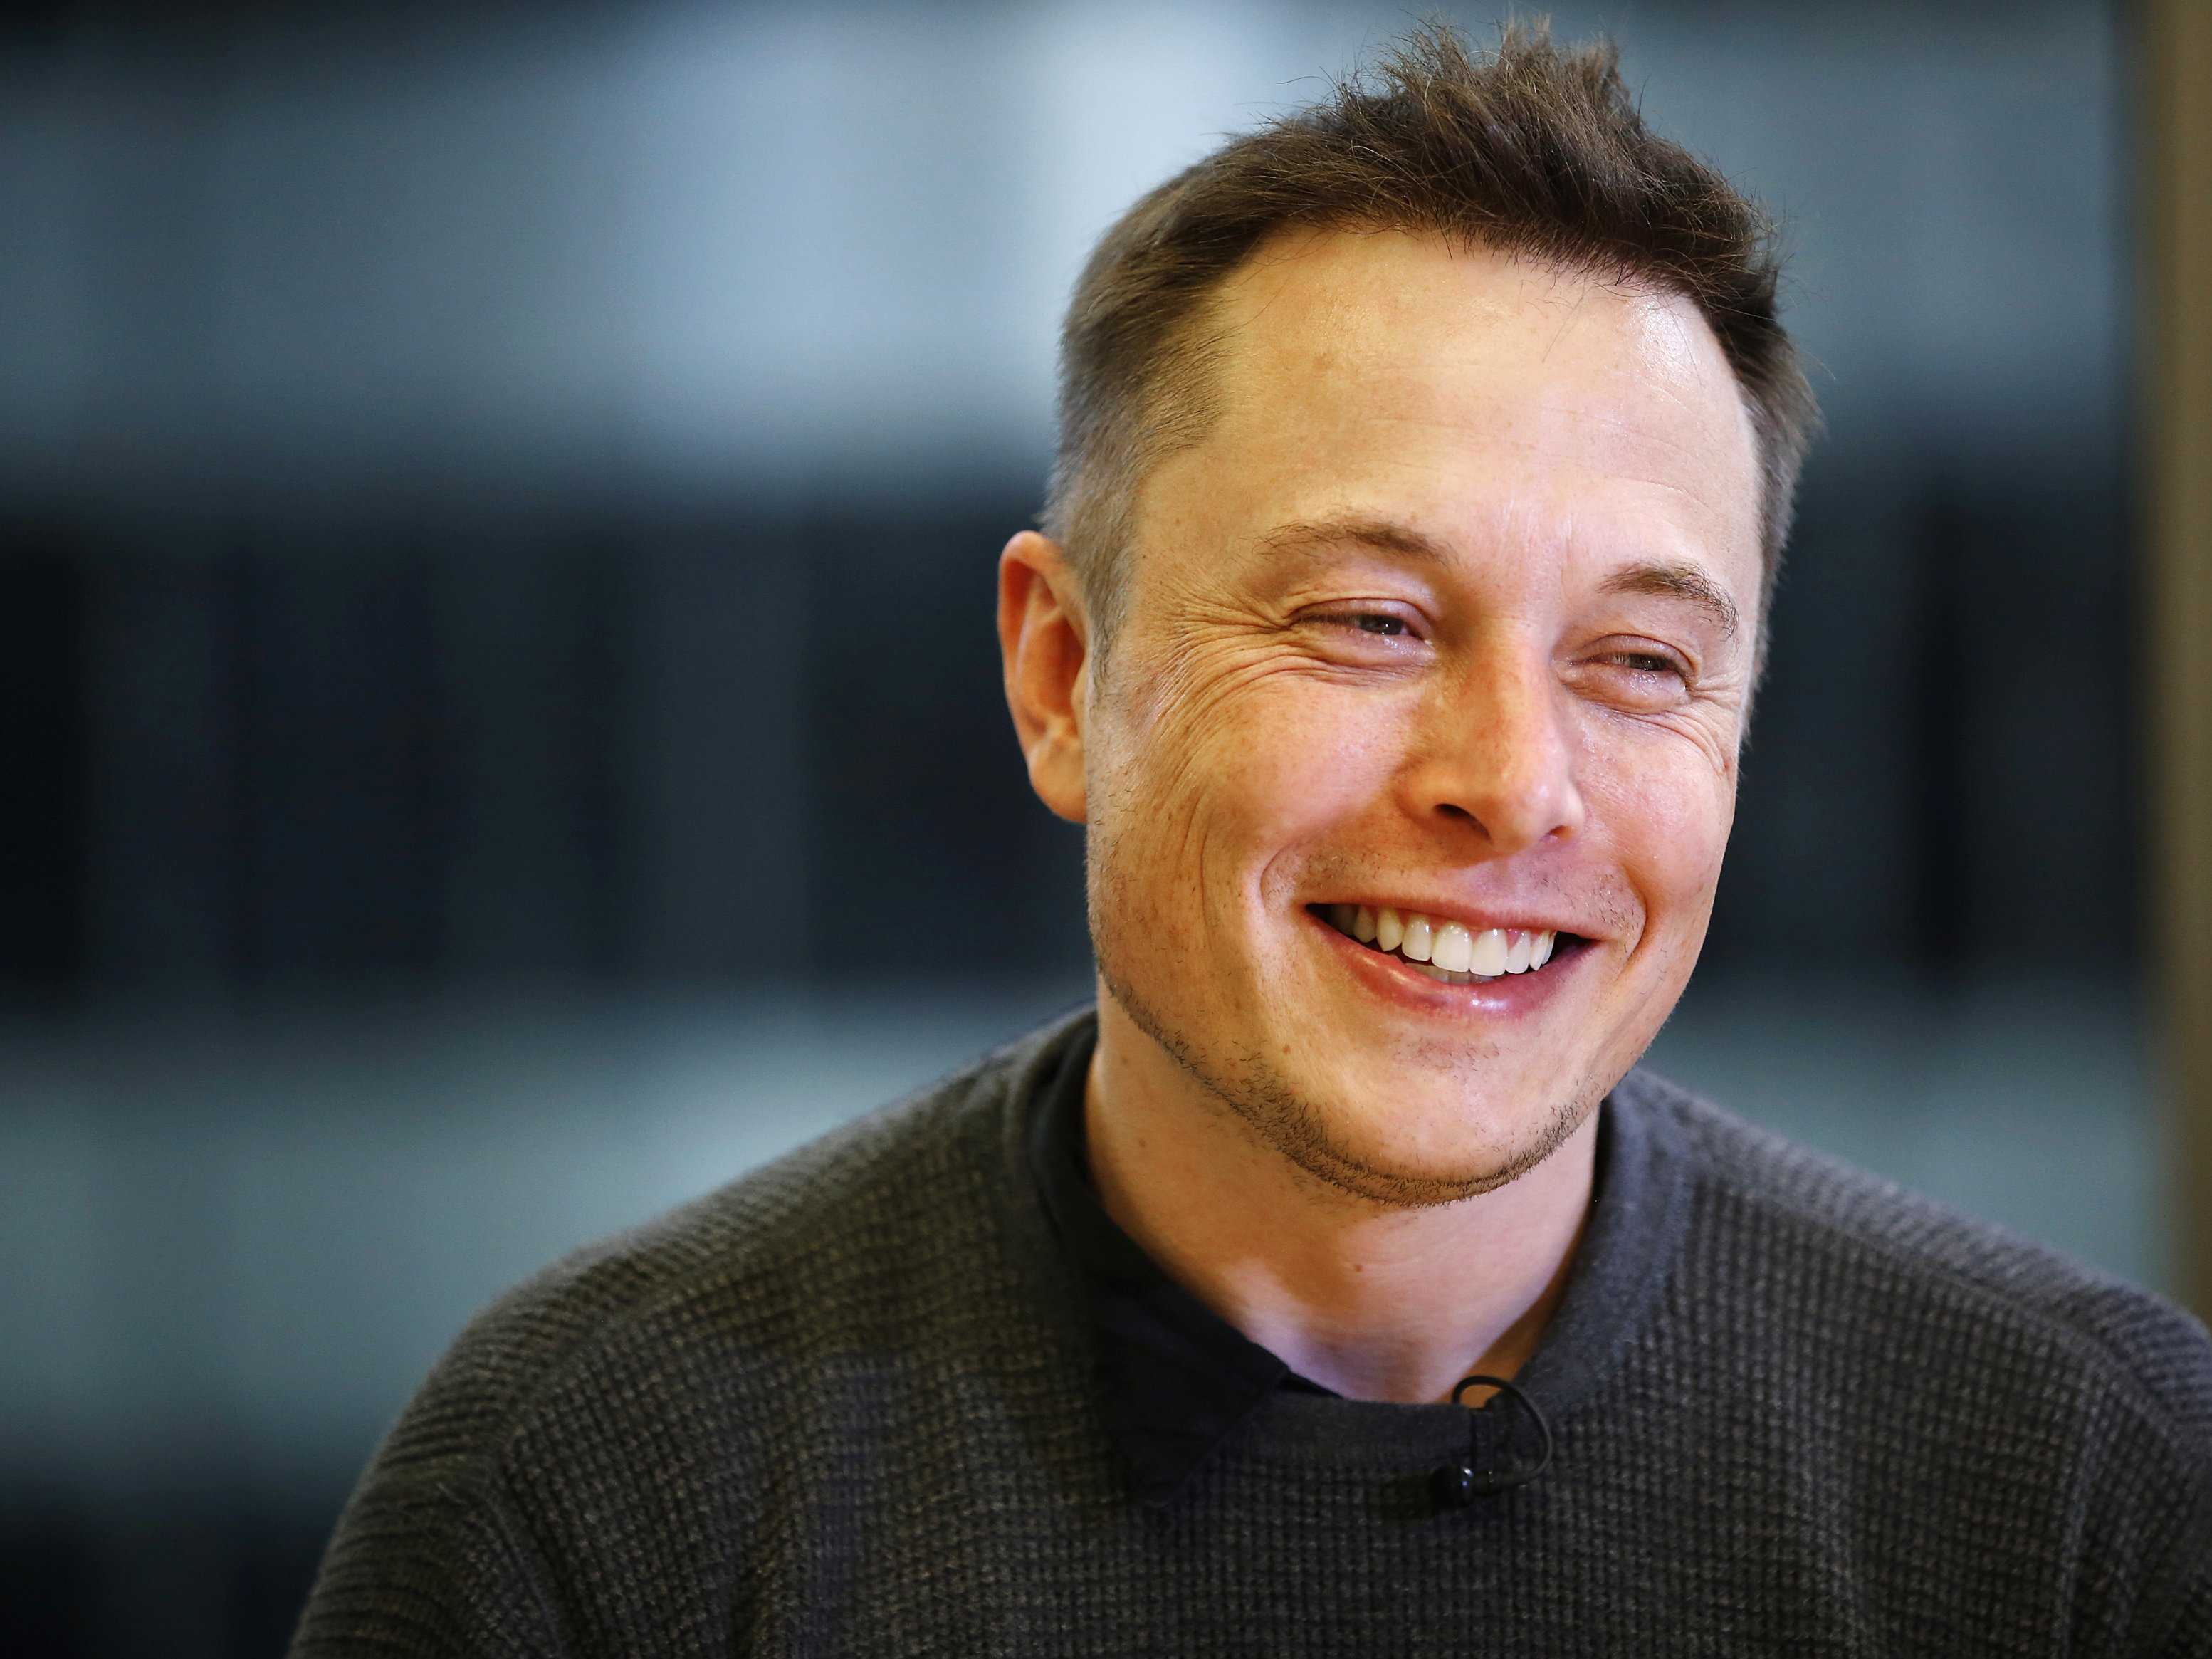 How has Elon Musk revolutionised the world? – How It Works